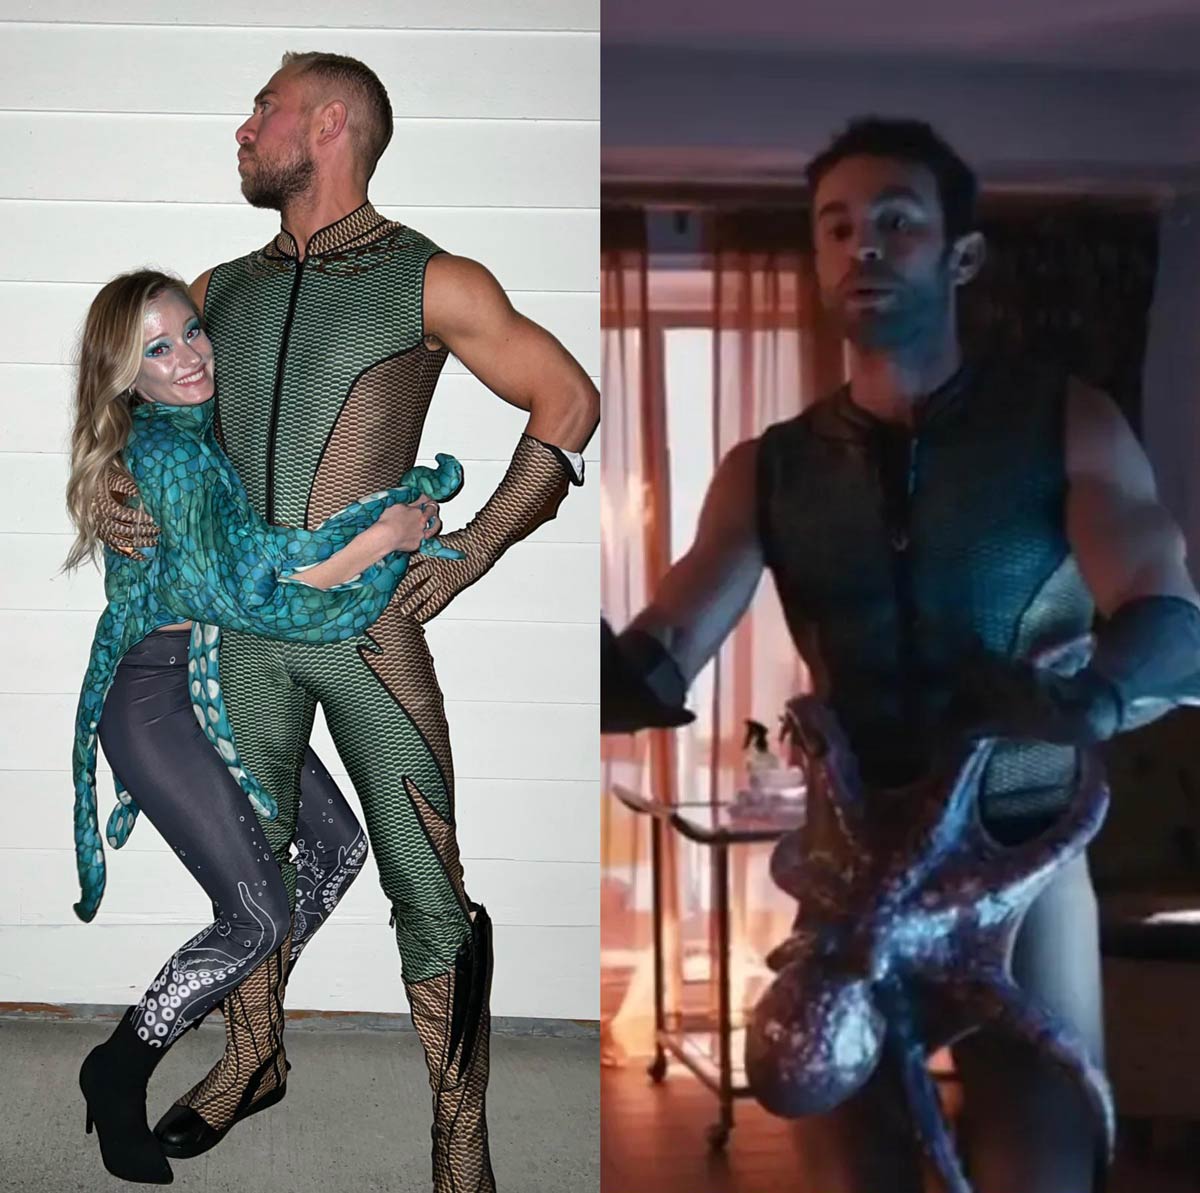 My boyfriend and me in our Halloween costumes this year